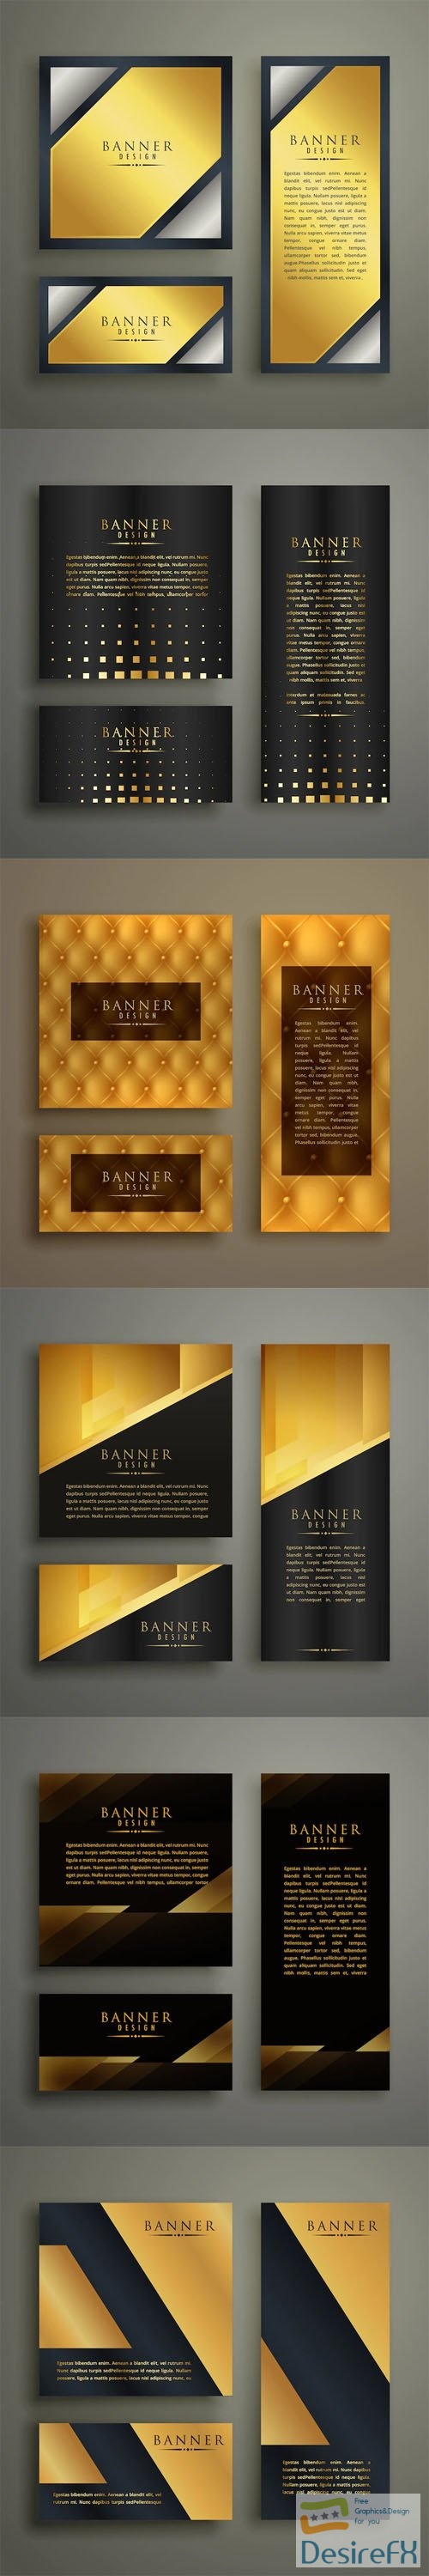 Luxury Banners - 30 Vector Banners Design Templates